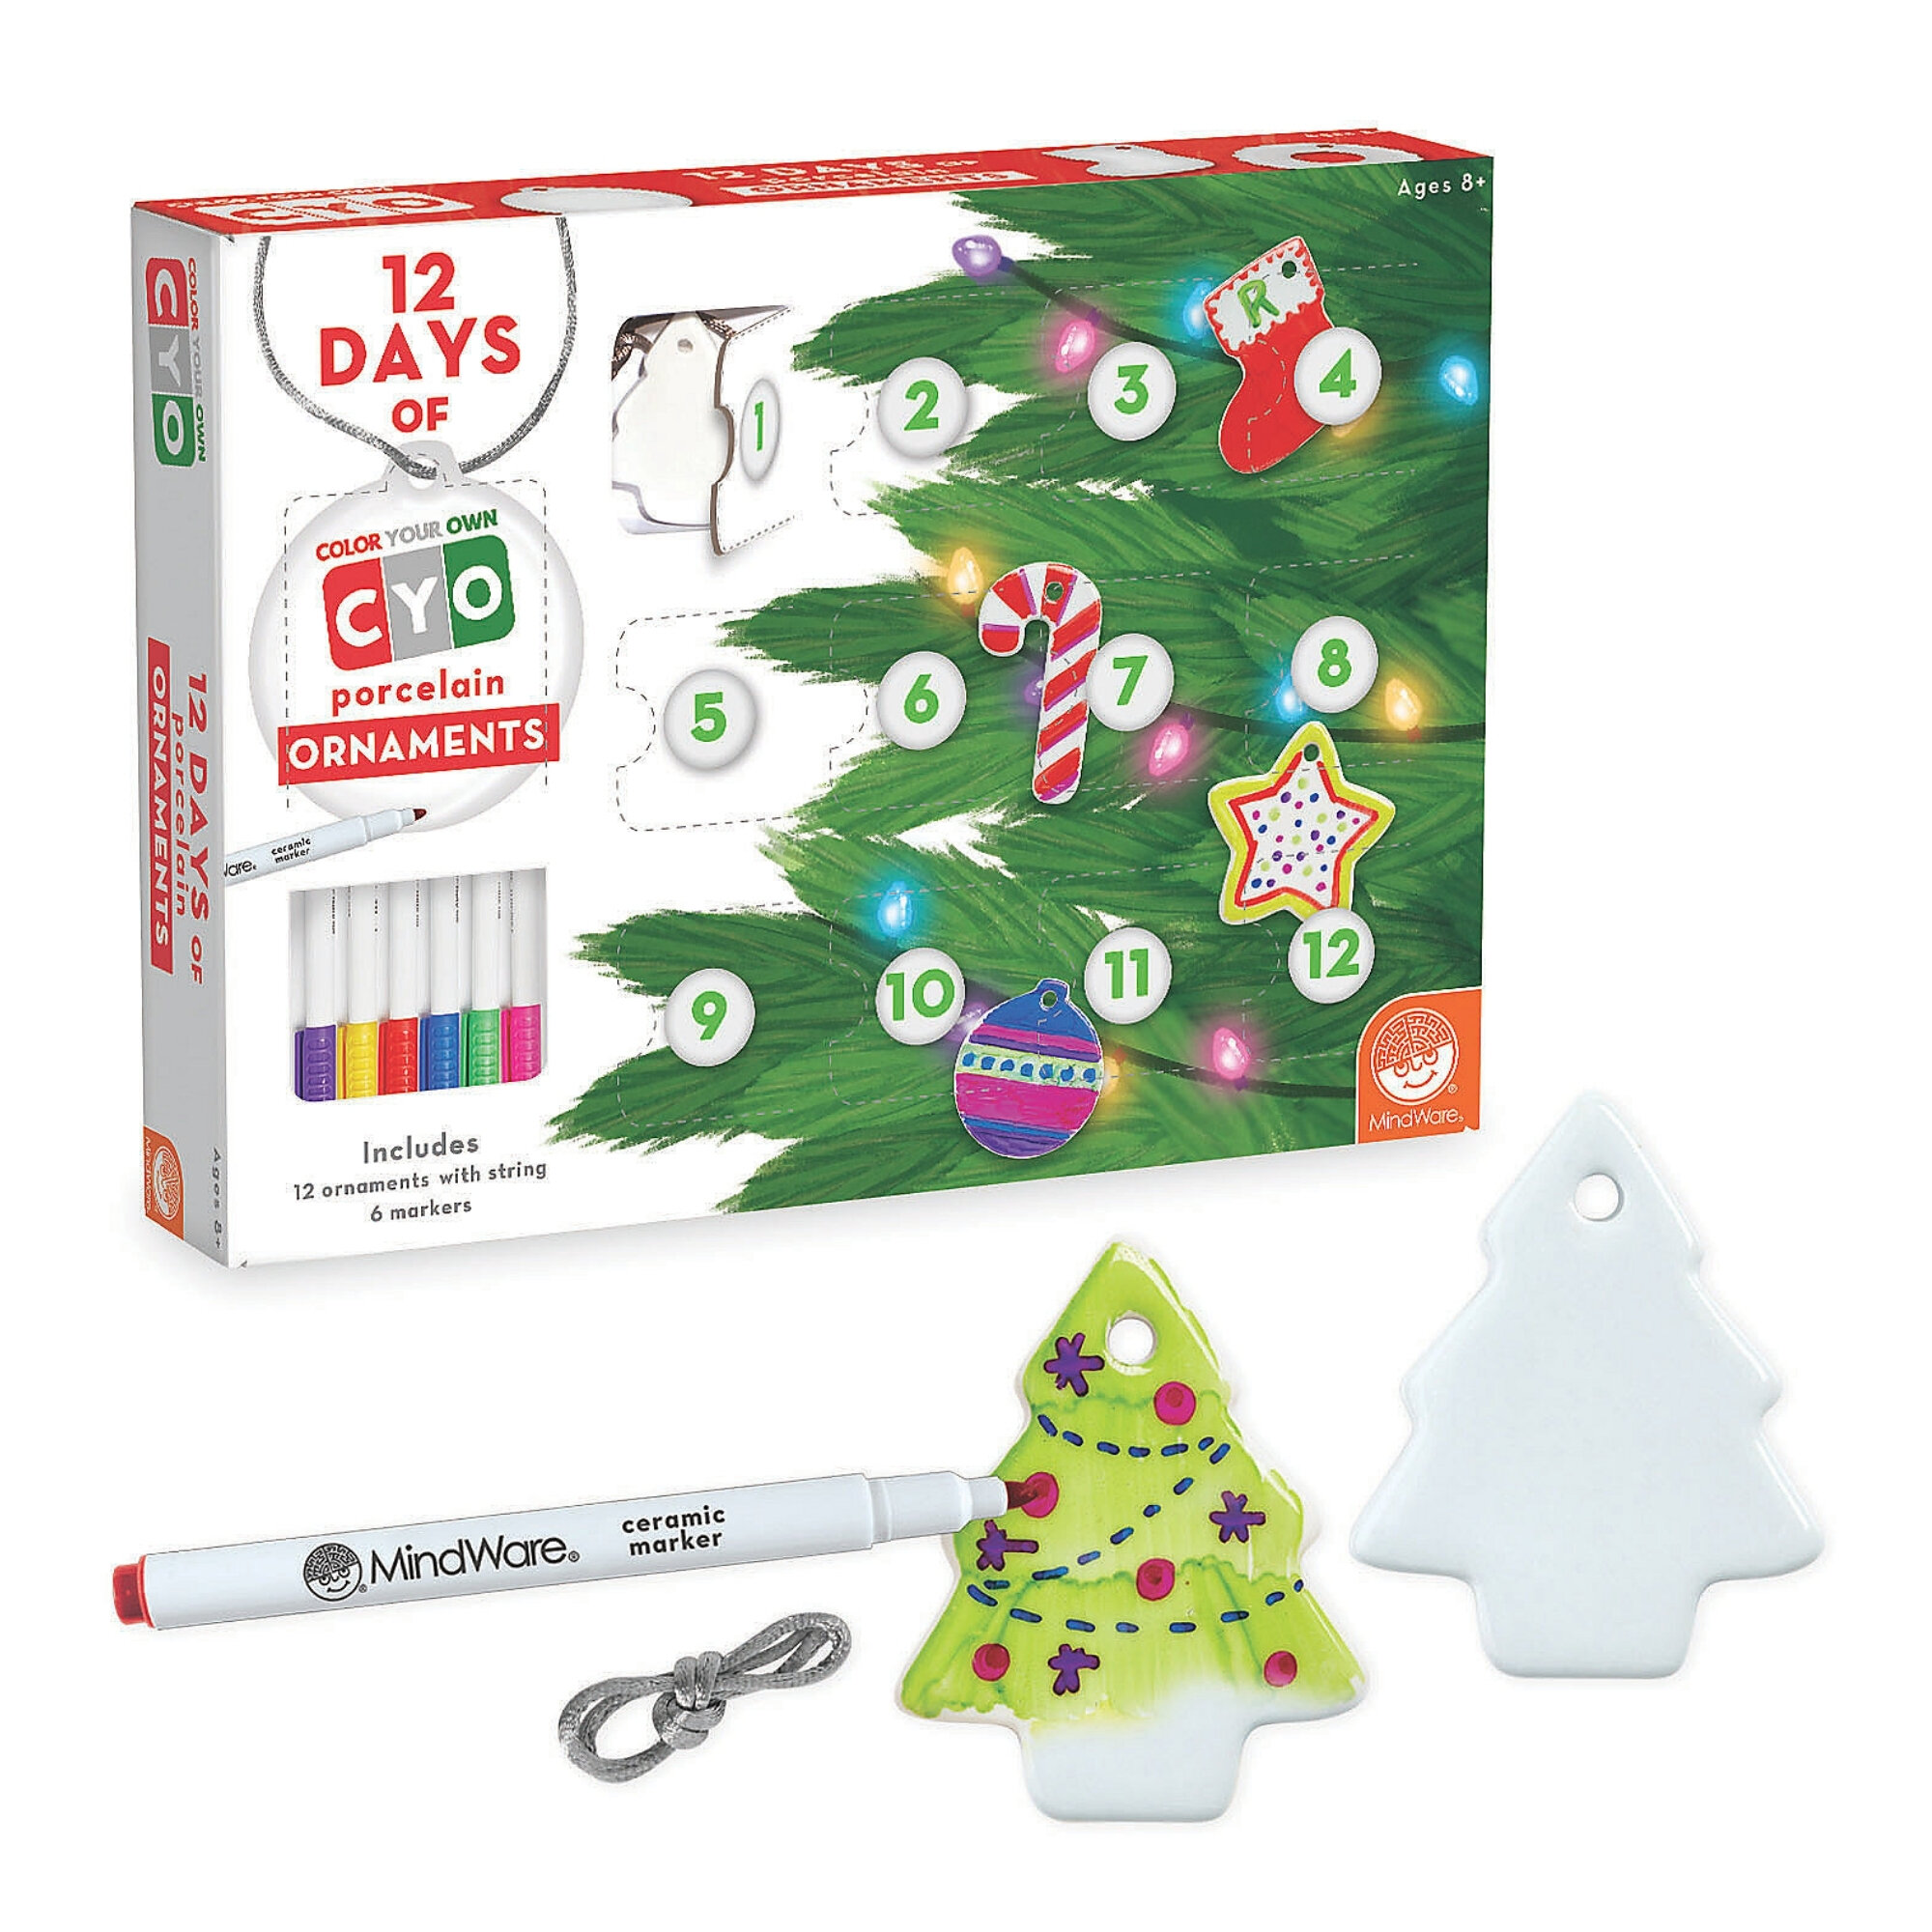 12 Days of Color Your Own Ornaments, $24.95 